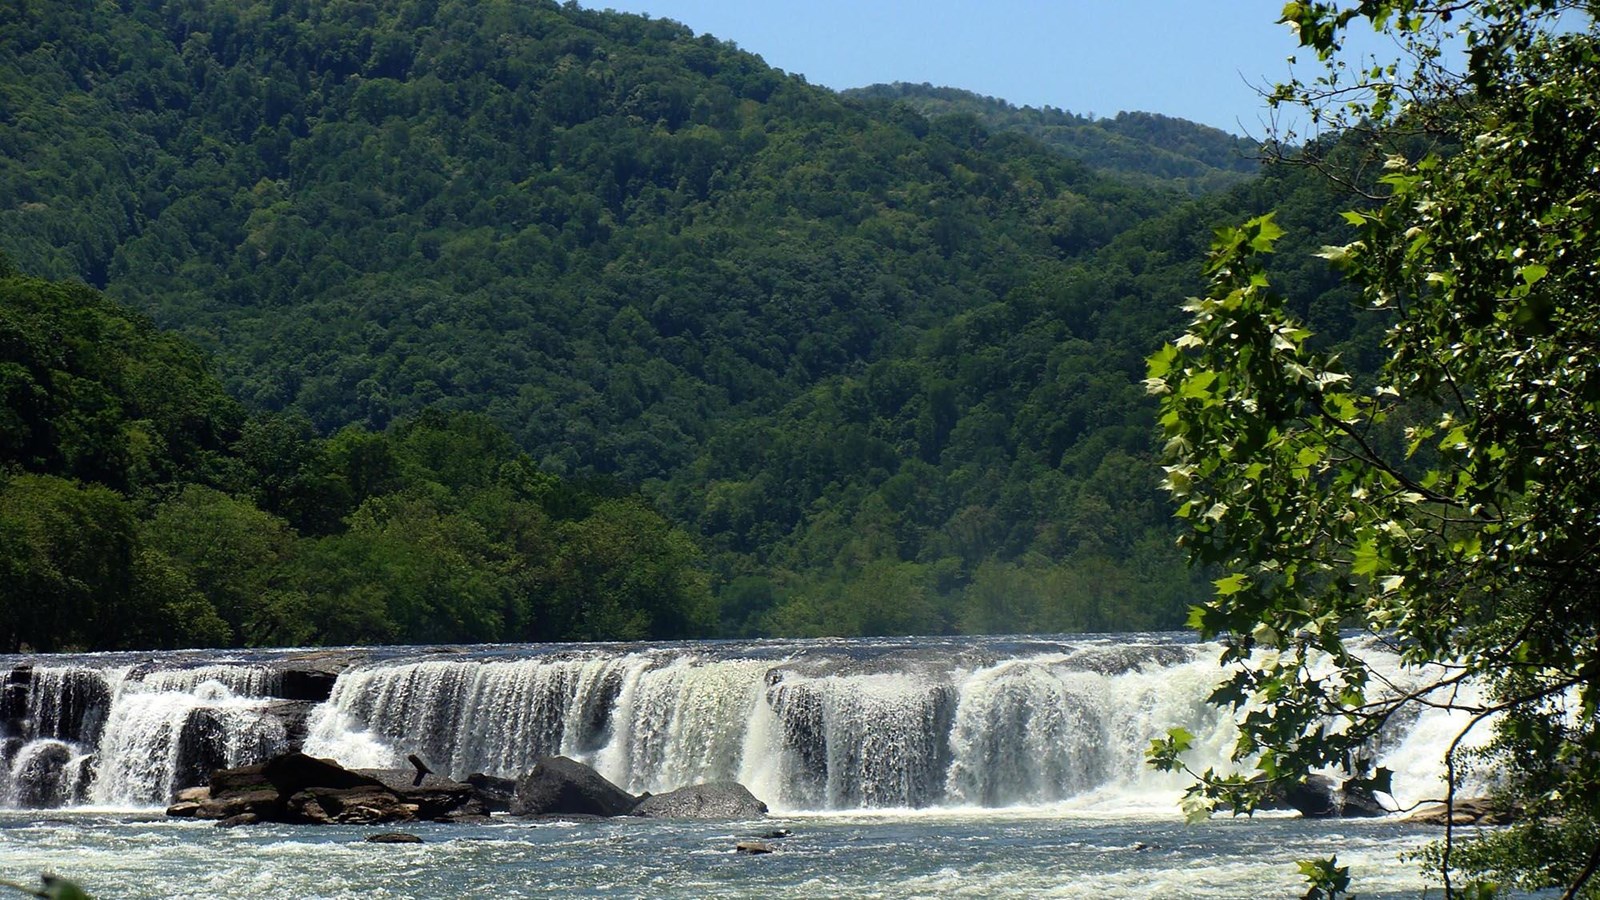 A large waterfall spanning across a wide river